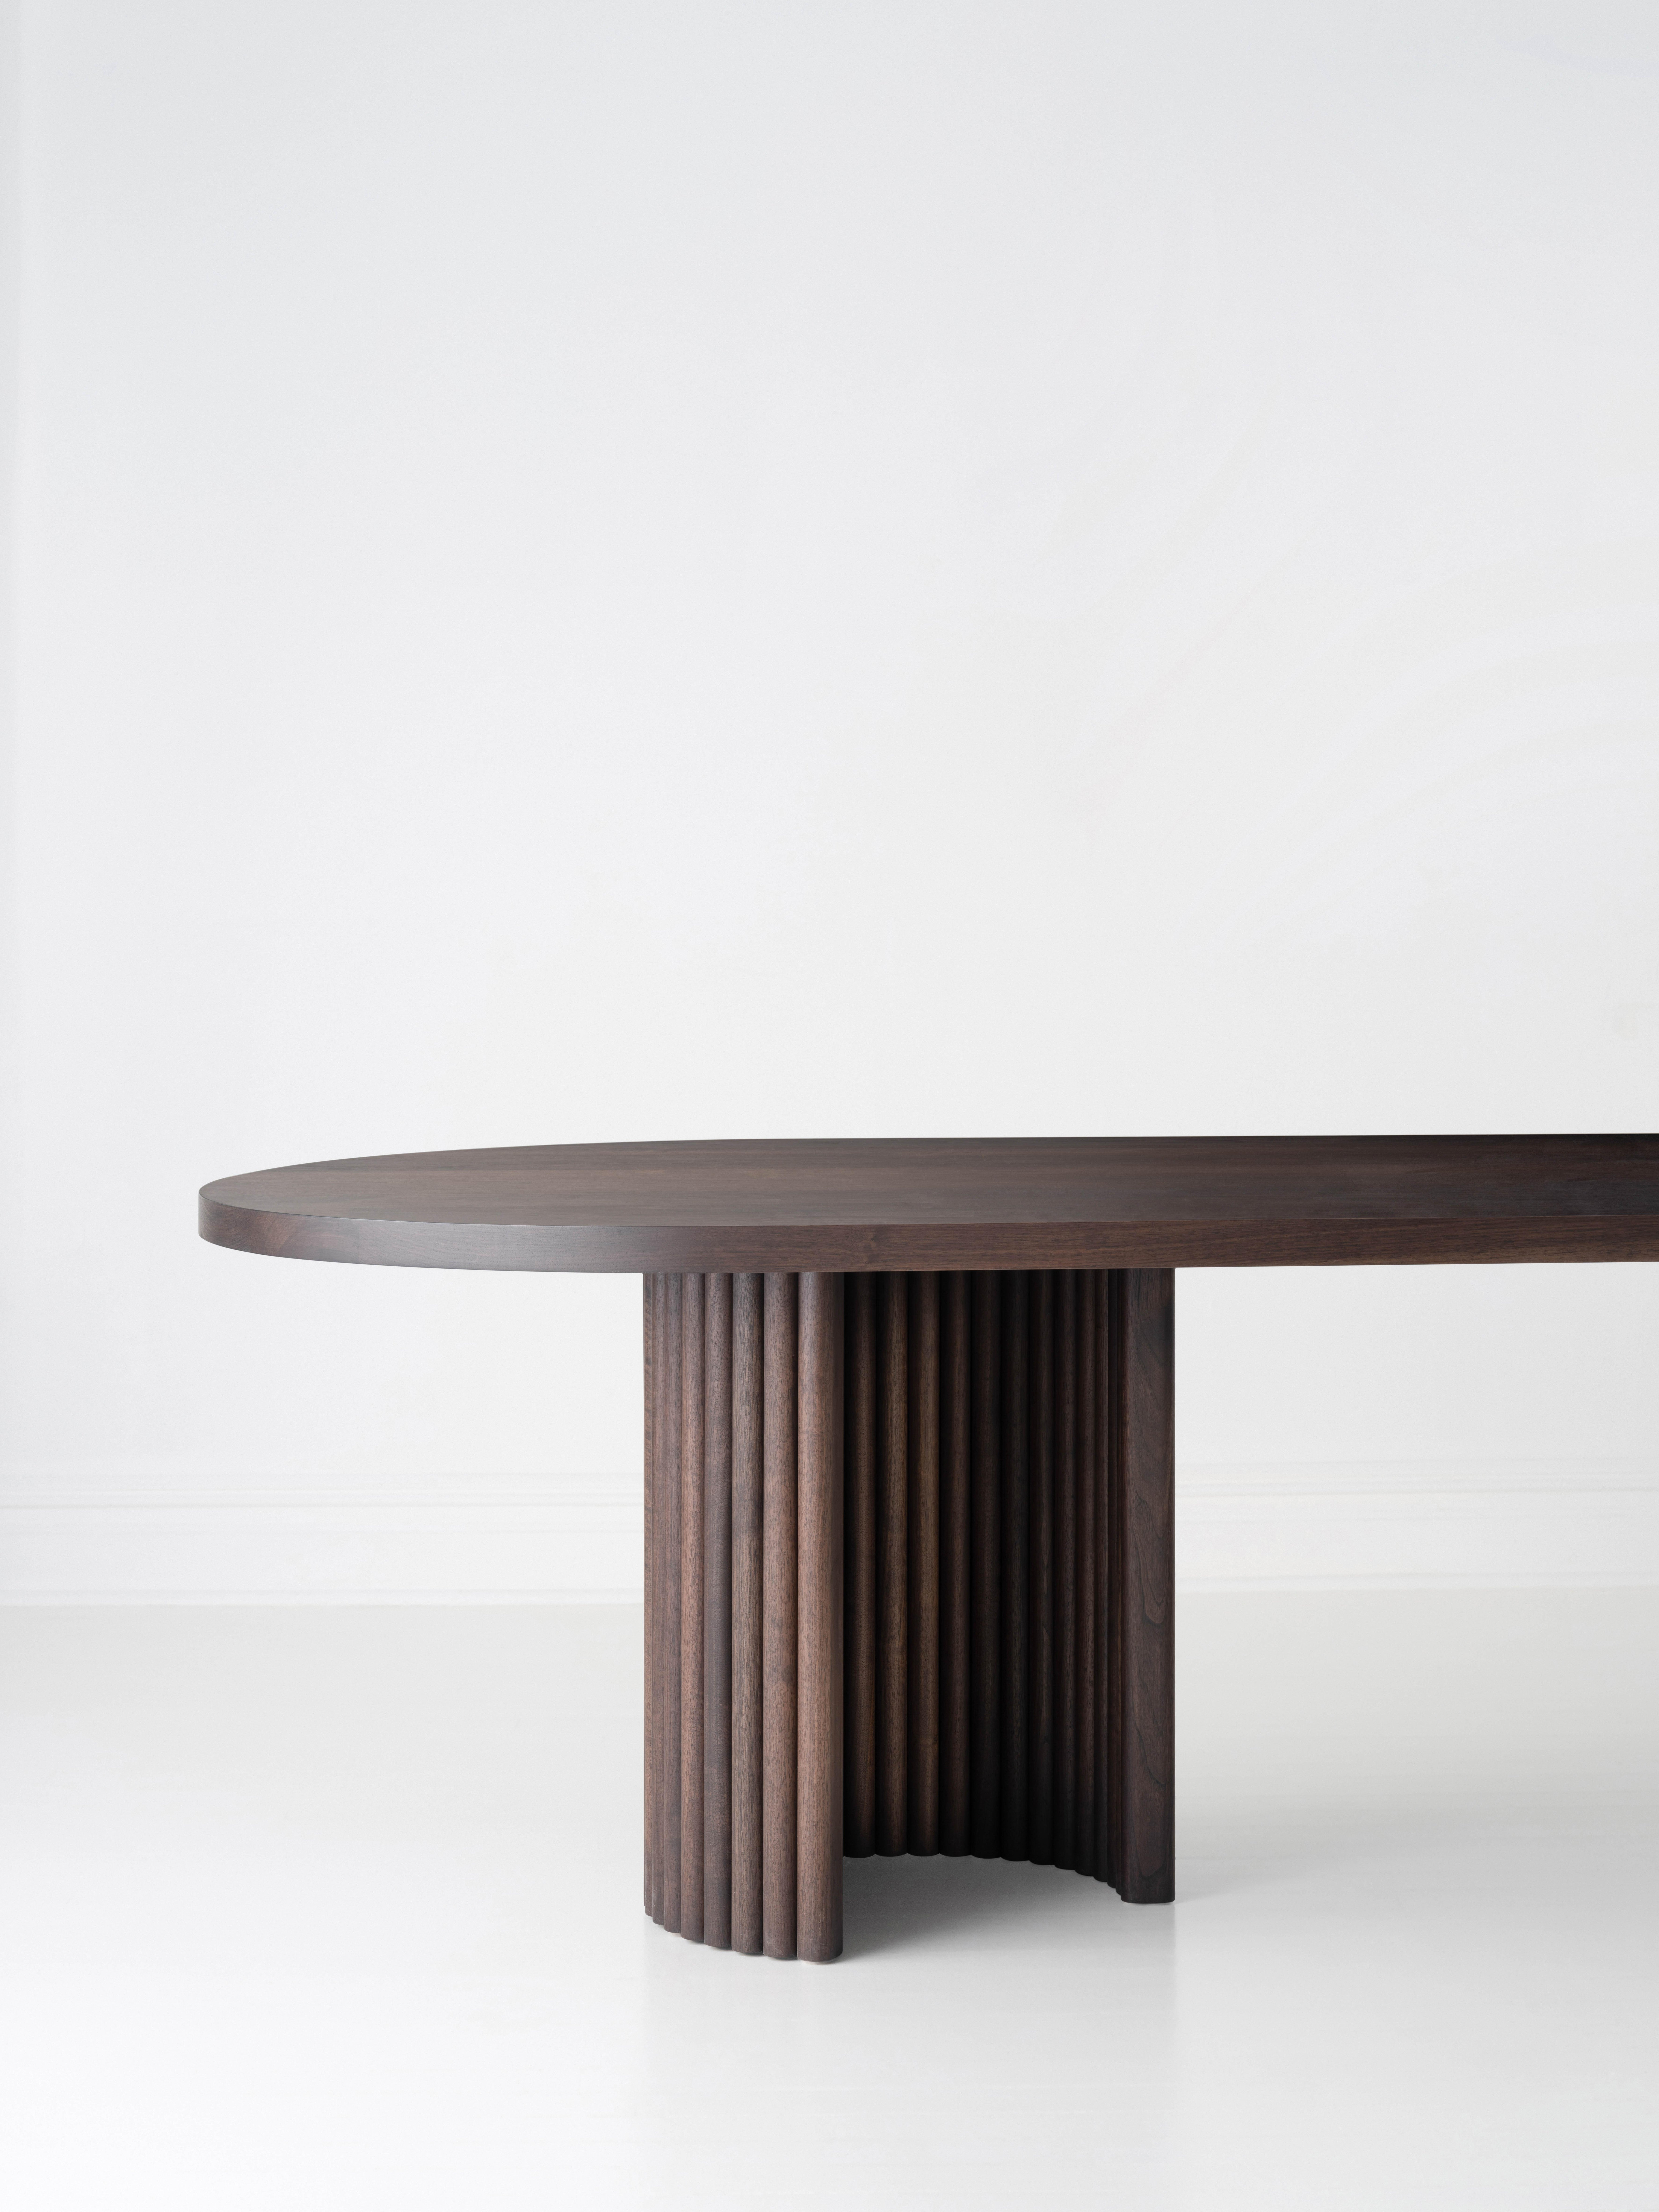 statement dining table